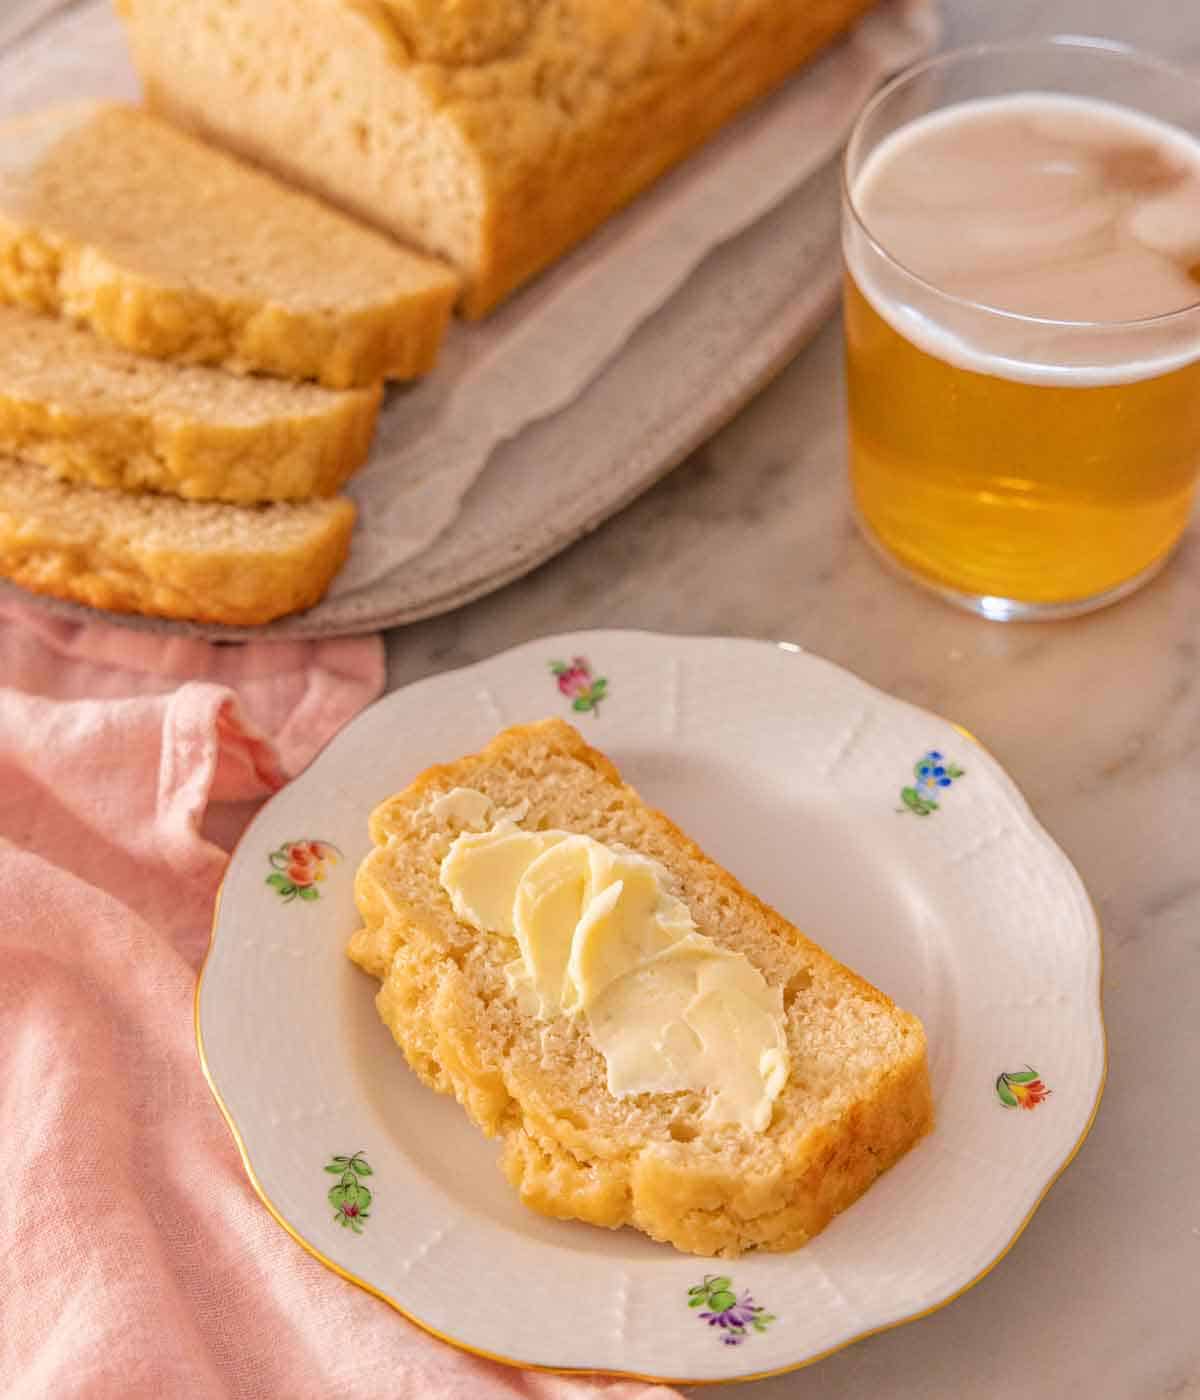 A plate with a slice of beer bread with butter spread on top, with the cut loaf and a drink in the back.